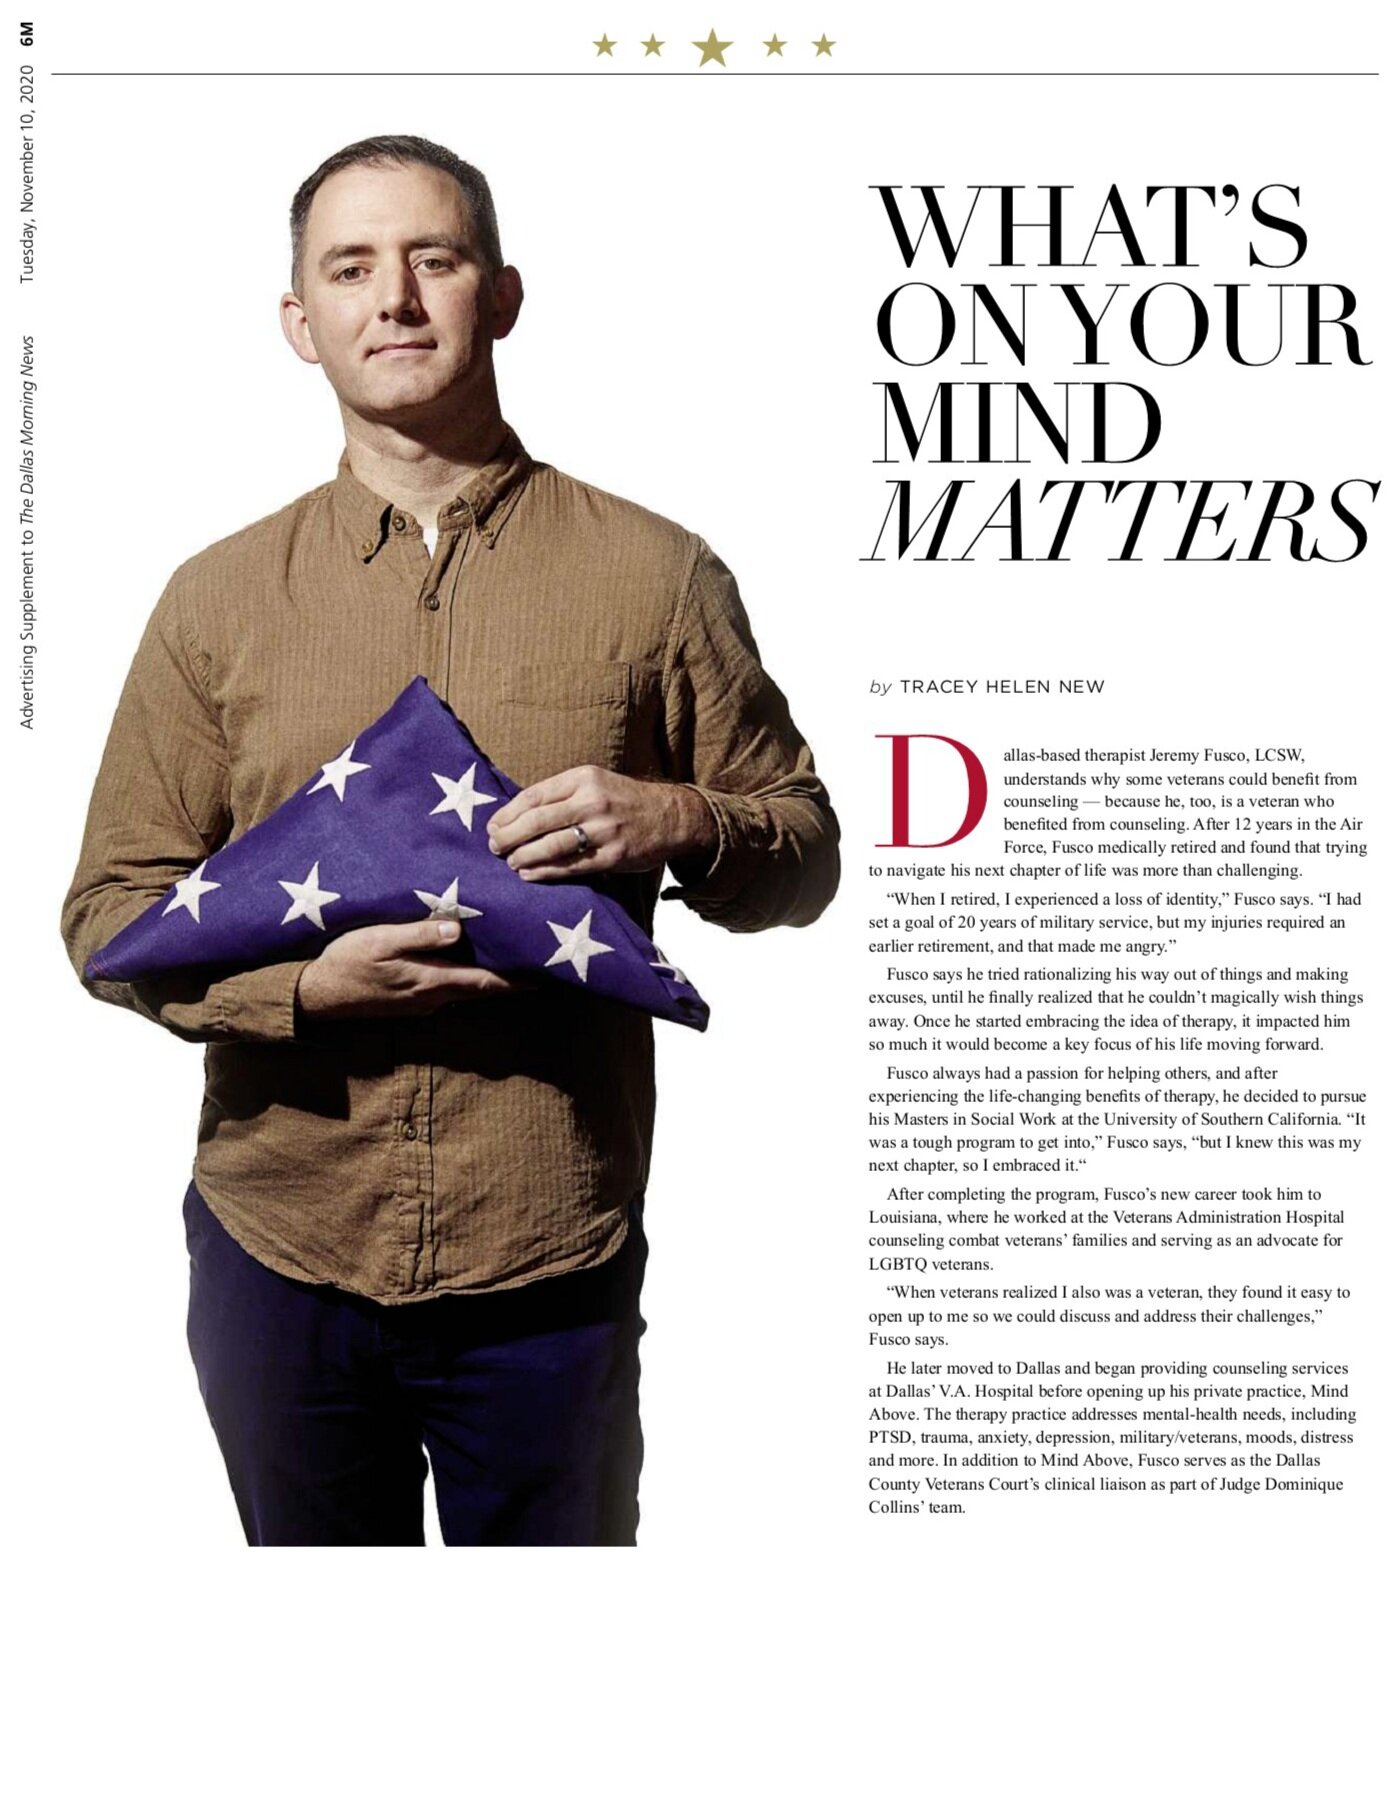 Veterans Day Feature - Dallas Morning News